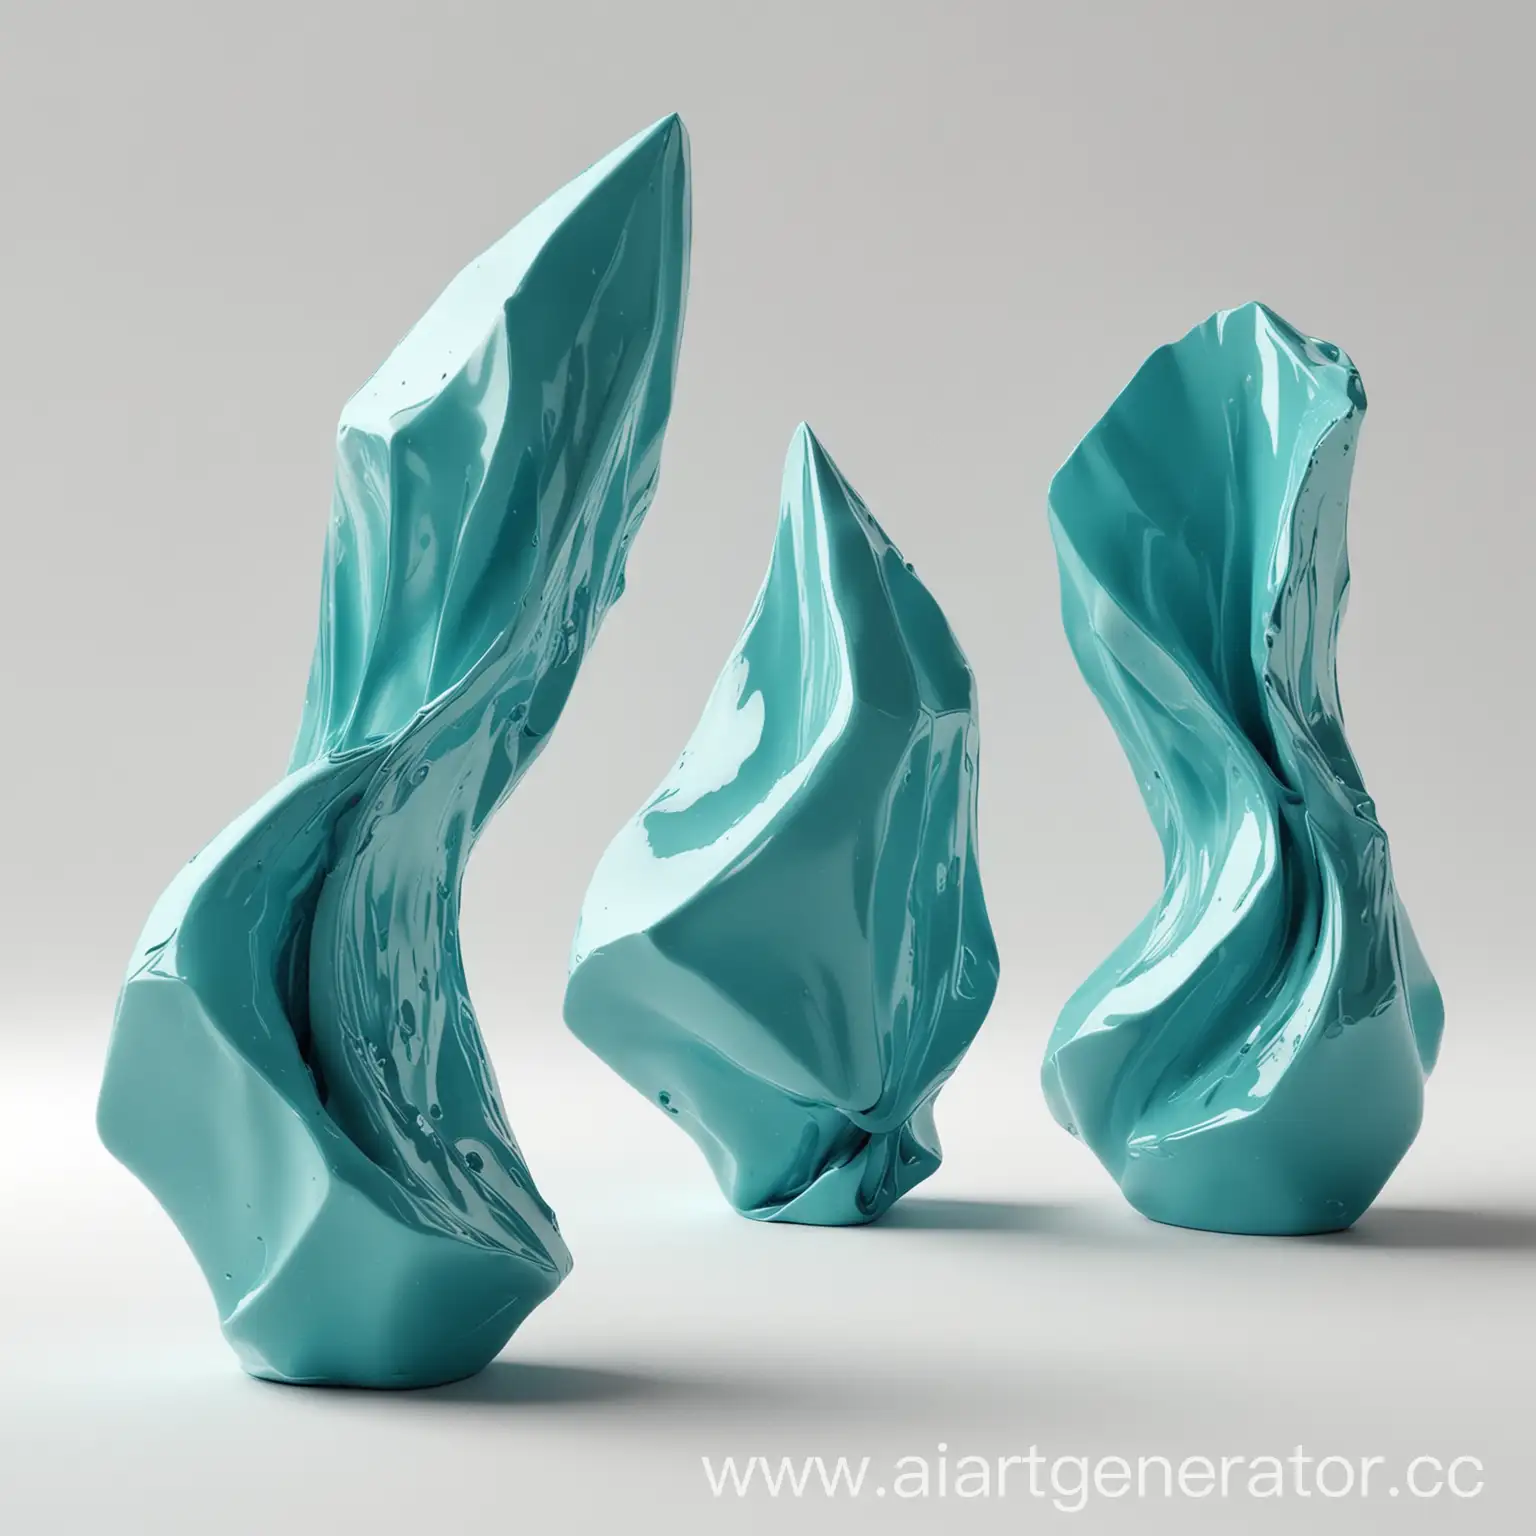 Turquoise-Abstract-Figures-on-White-Background-Realistic-Contemporary-Art